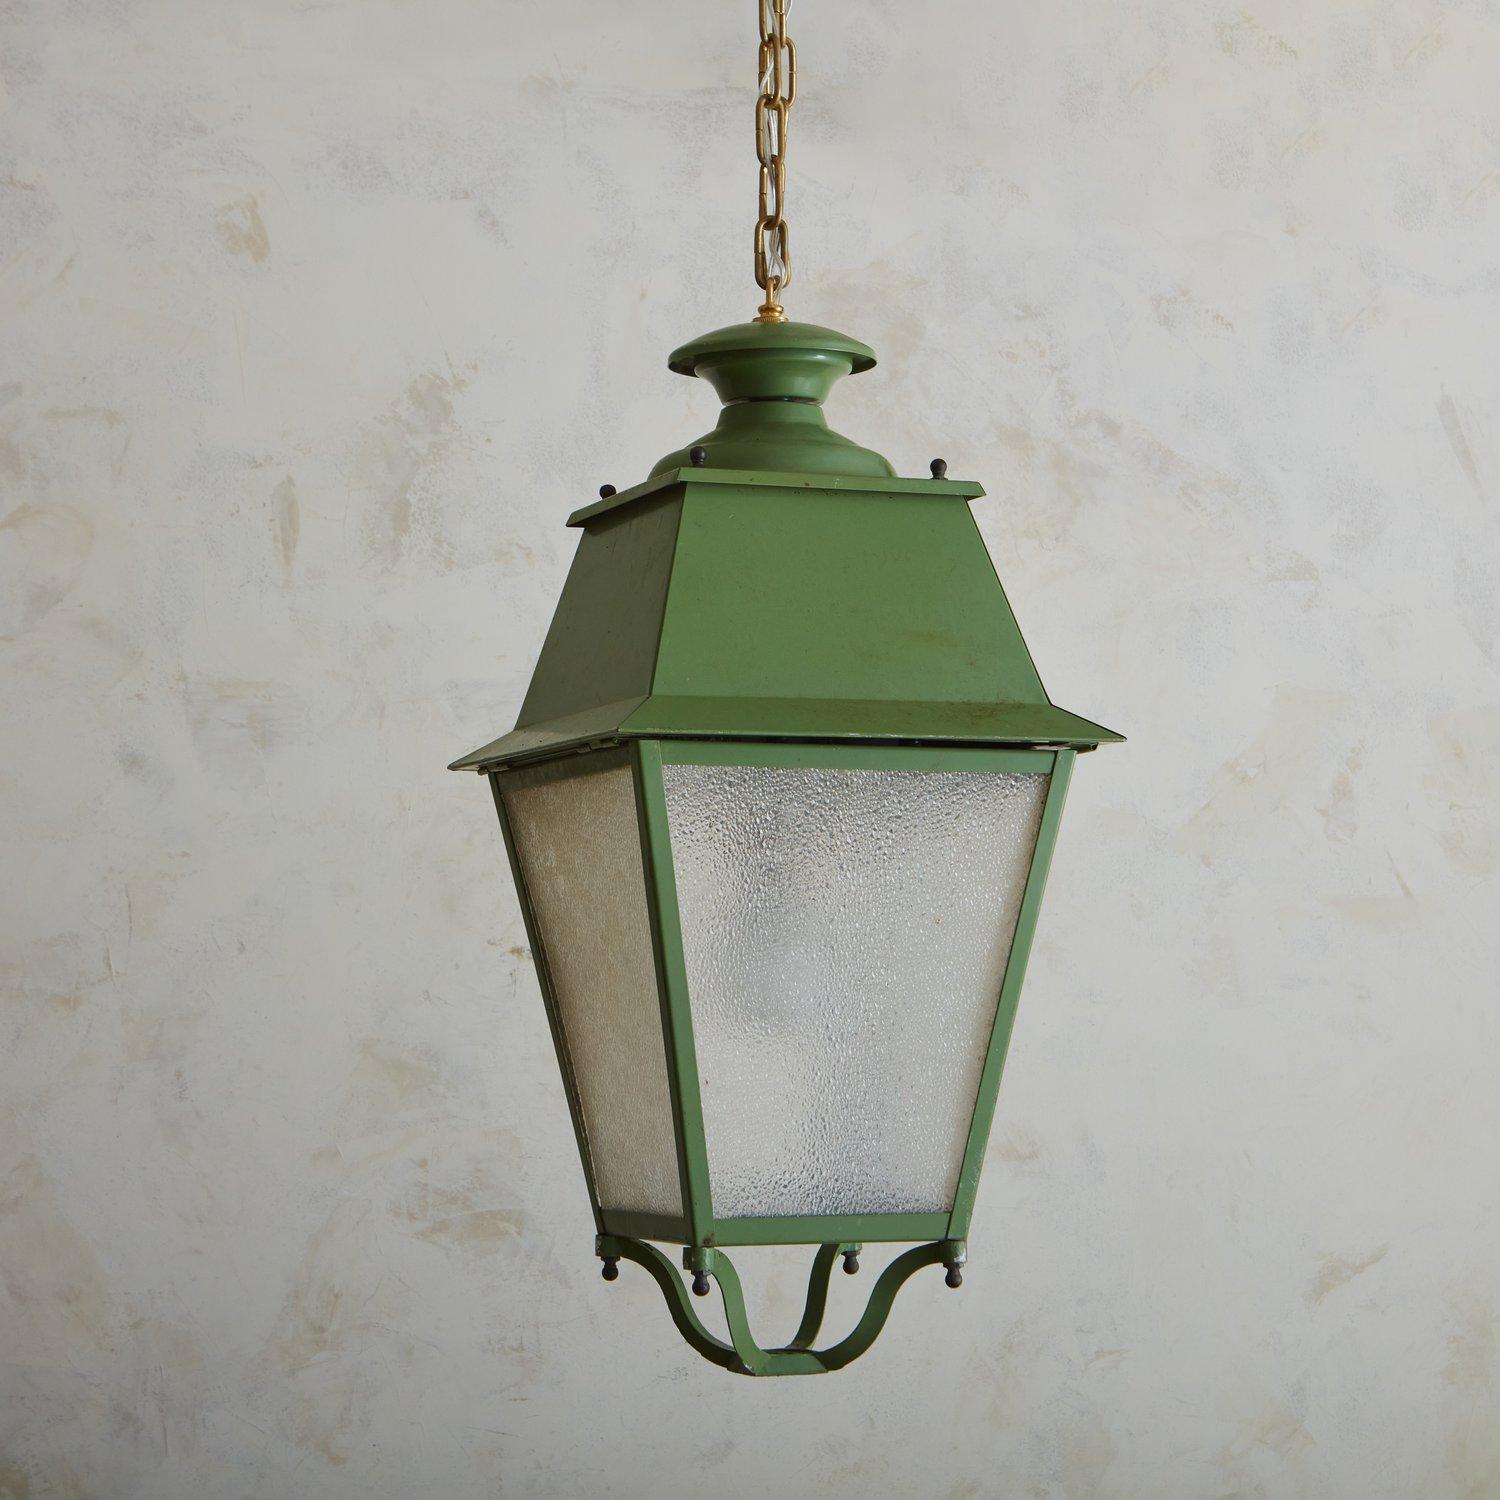 A large scale 1950s French lantern featuring a classic profile and painted a beautiful green hue. This fixture was constructed with metal and has four textured glass panels. Sourced in France, 1950s.